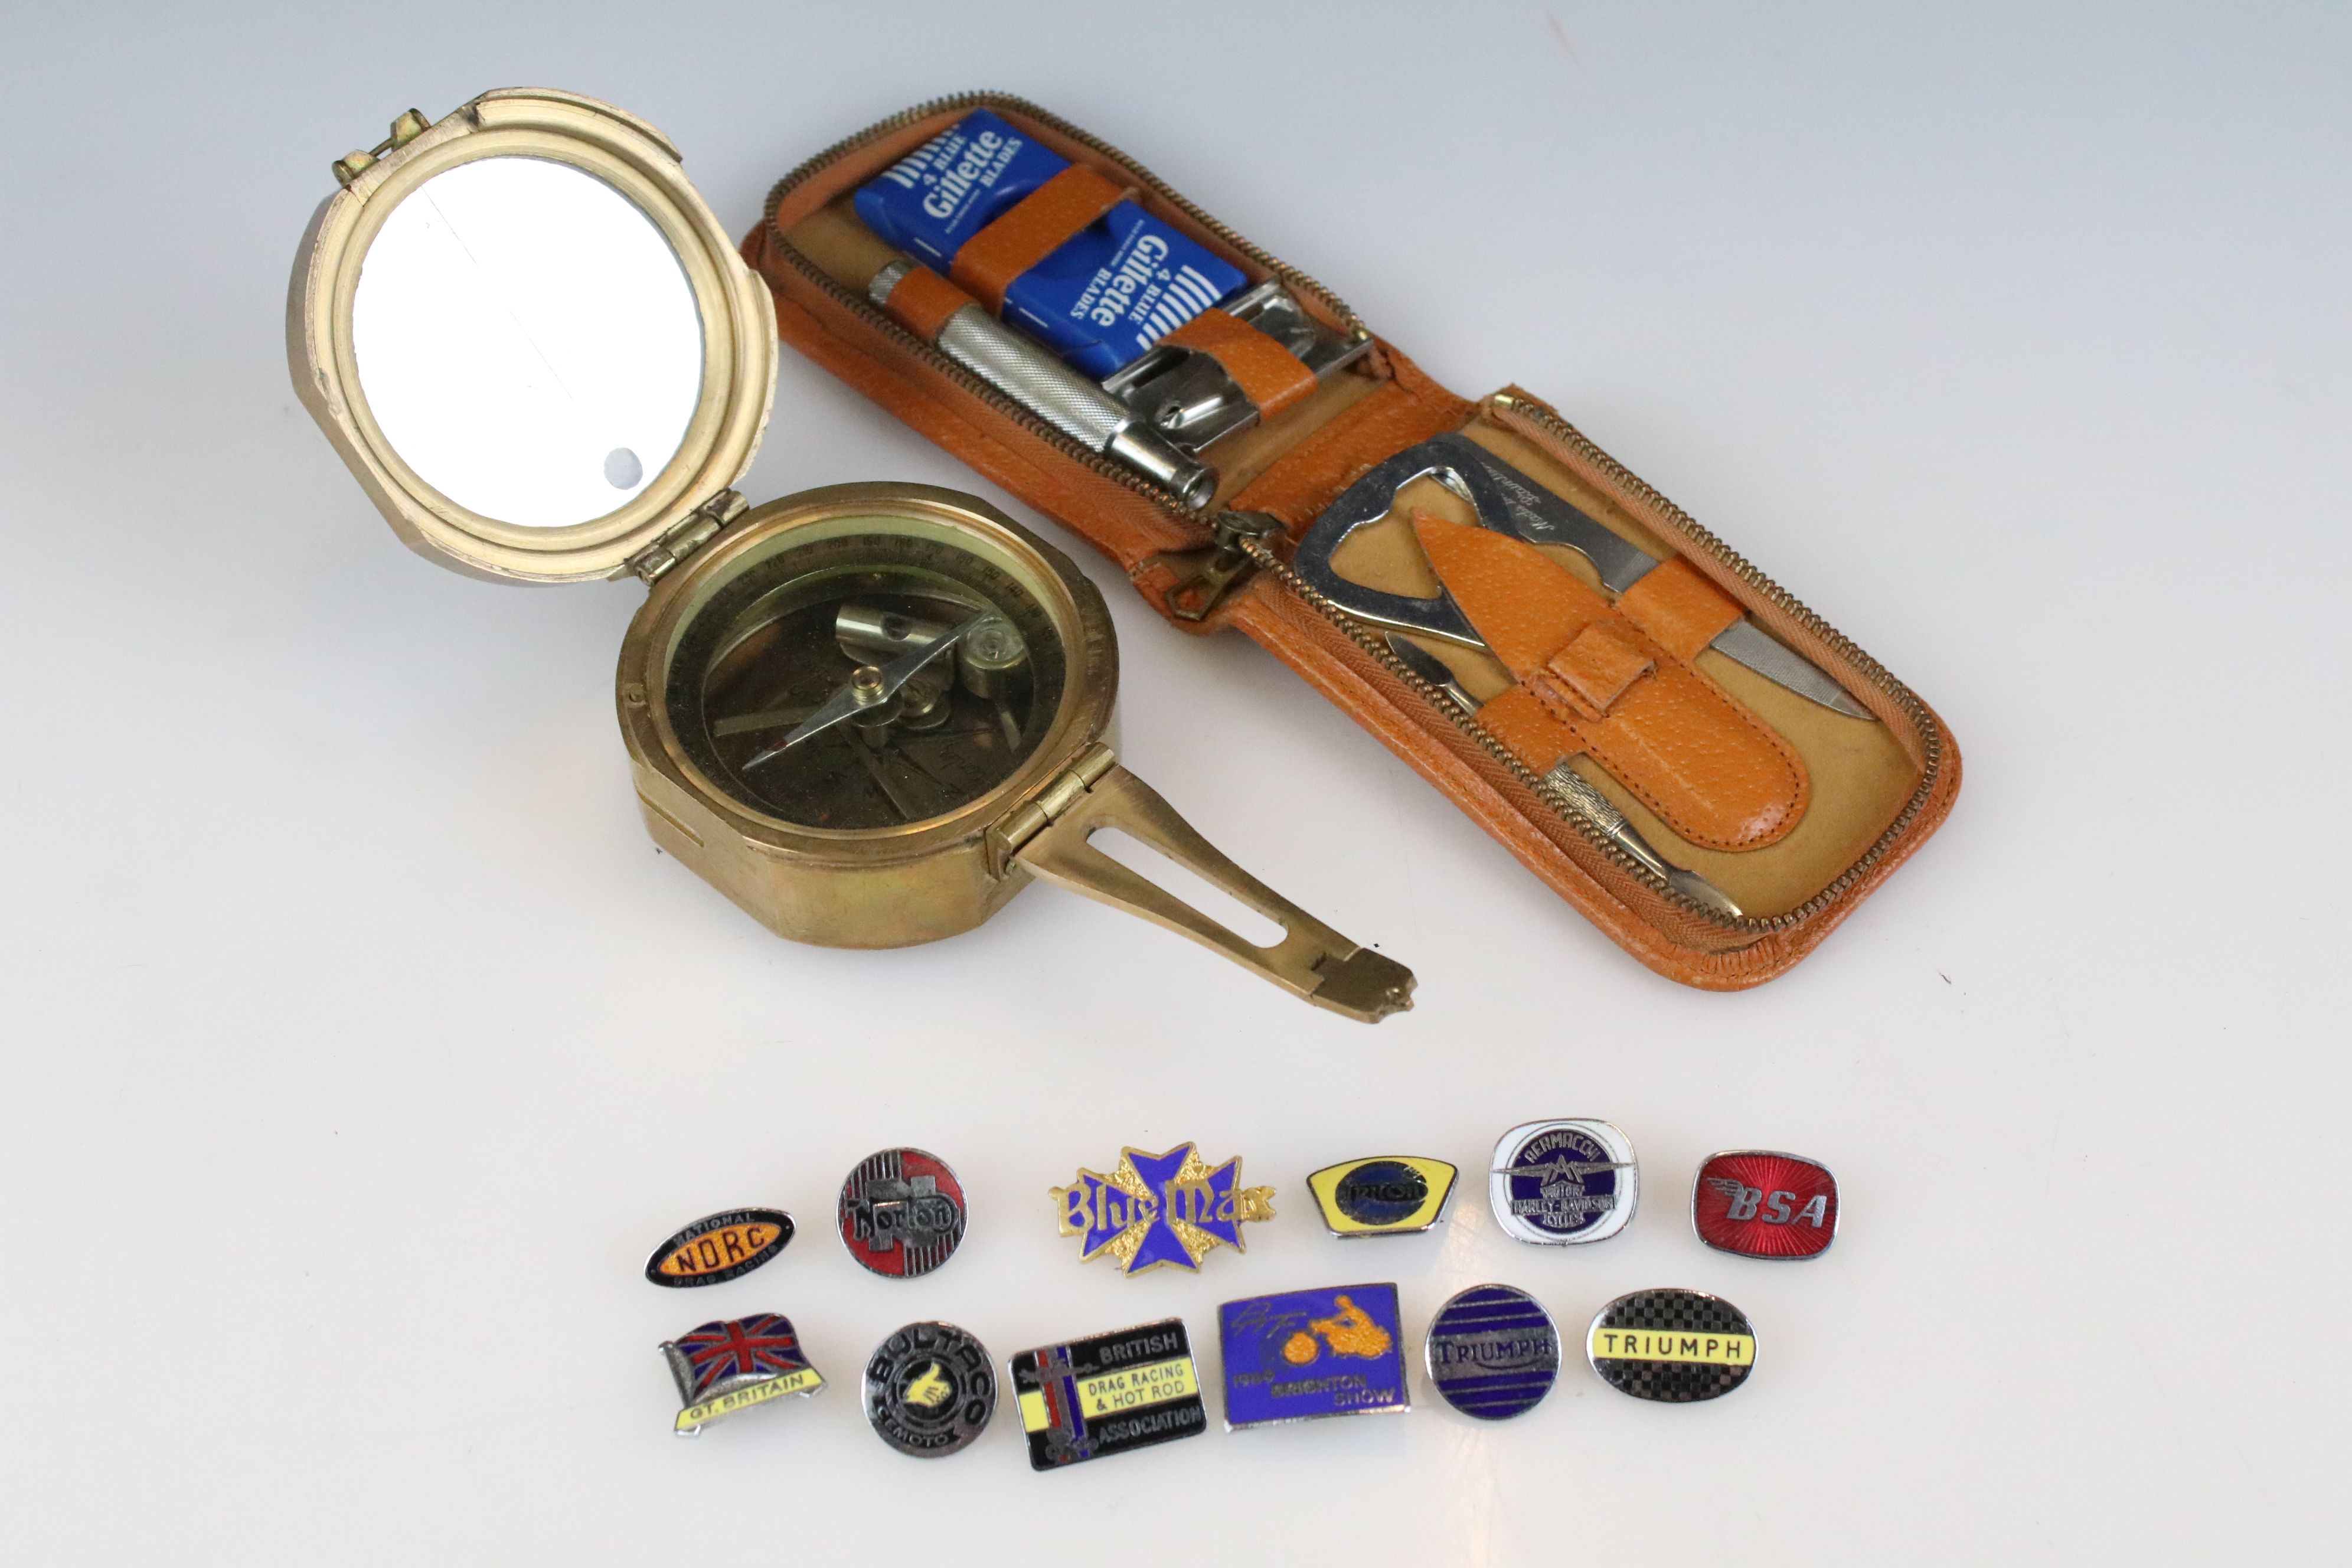 Stanley of London brass compass together with a small collection of motorcycling enamel badges (